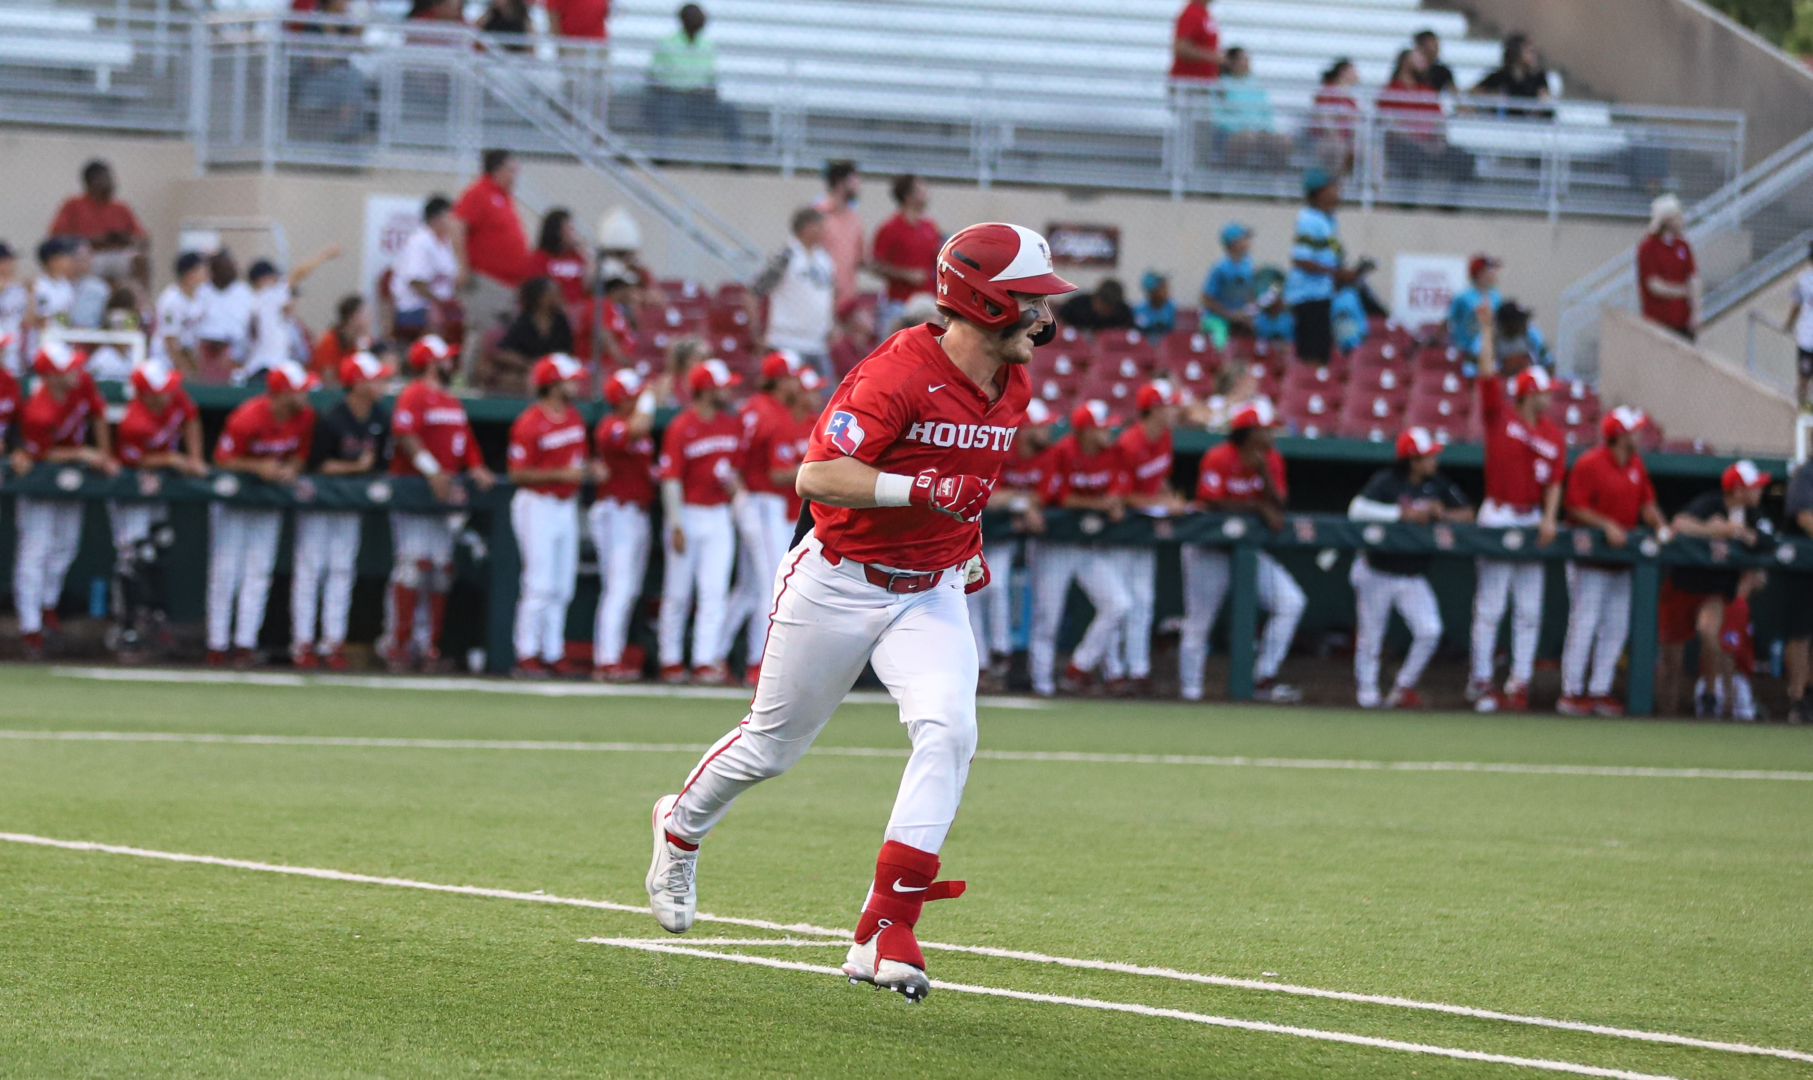 UH baseball shortstop Ian McMillan launched home run No. 7 of the season in the third inning of the Cougars' win over RIce on Wednesday night. | Sean Thomas/The Cougar